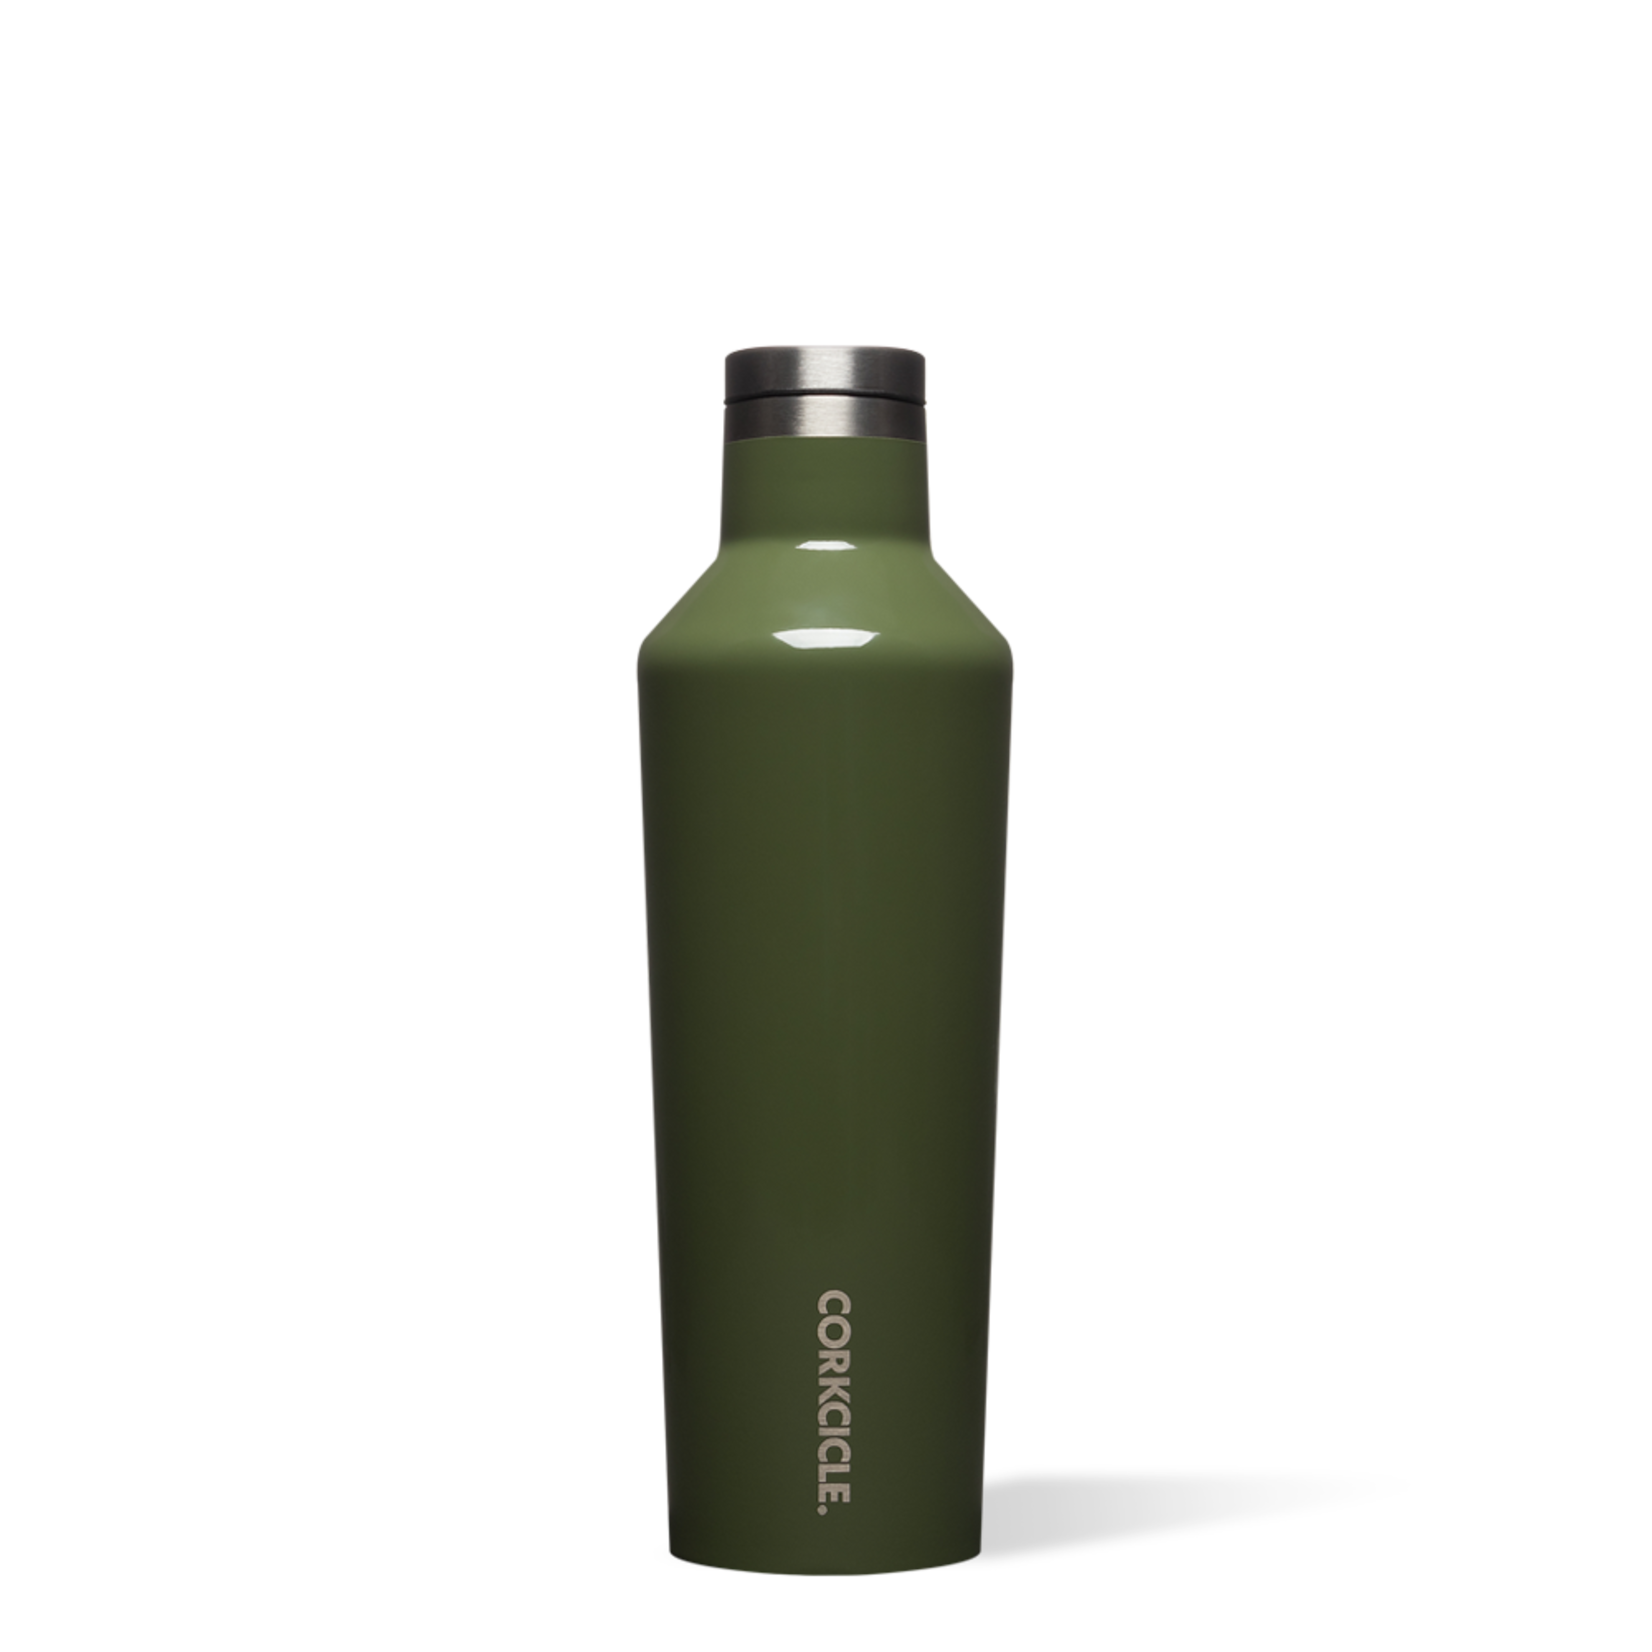 Corkcicle Corkcicle - Canteen 16oz - Gloss Olive